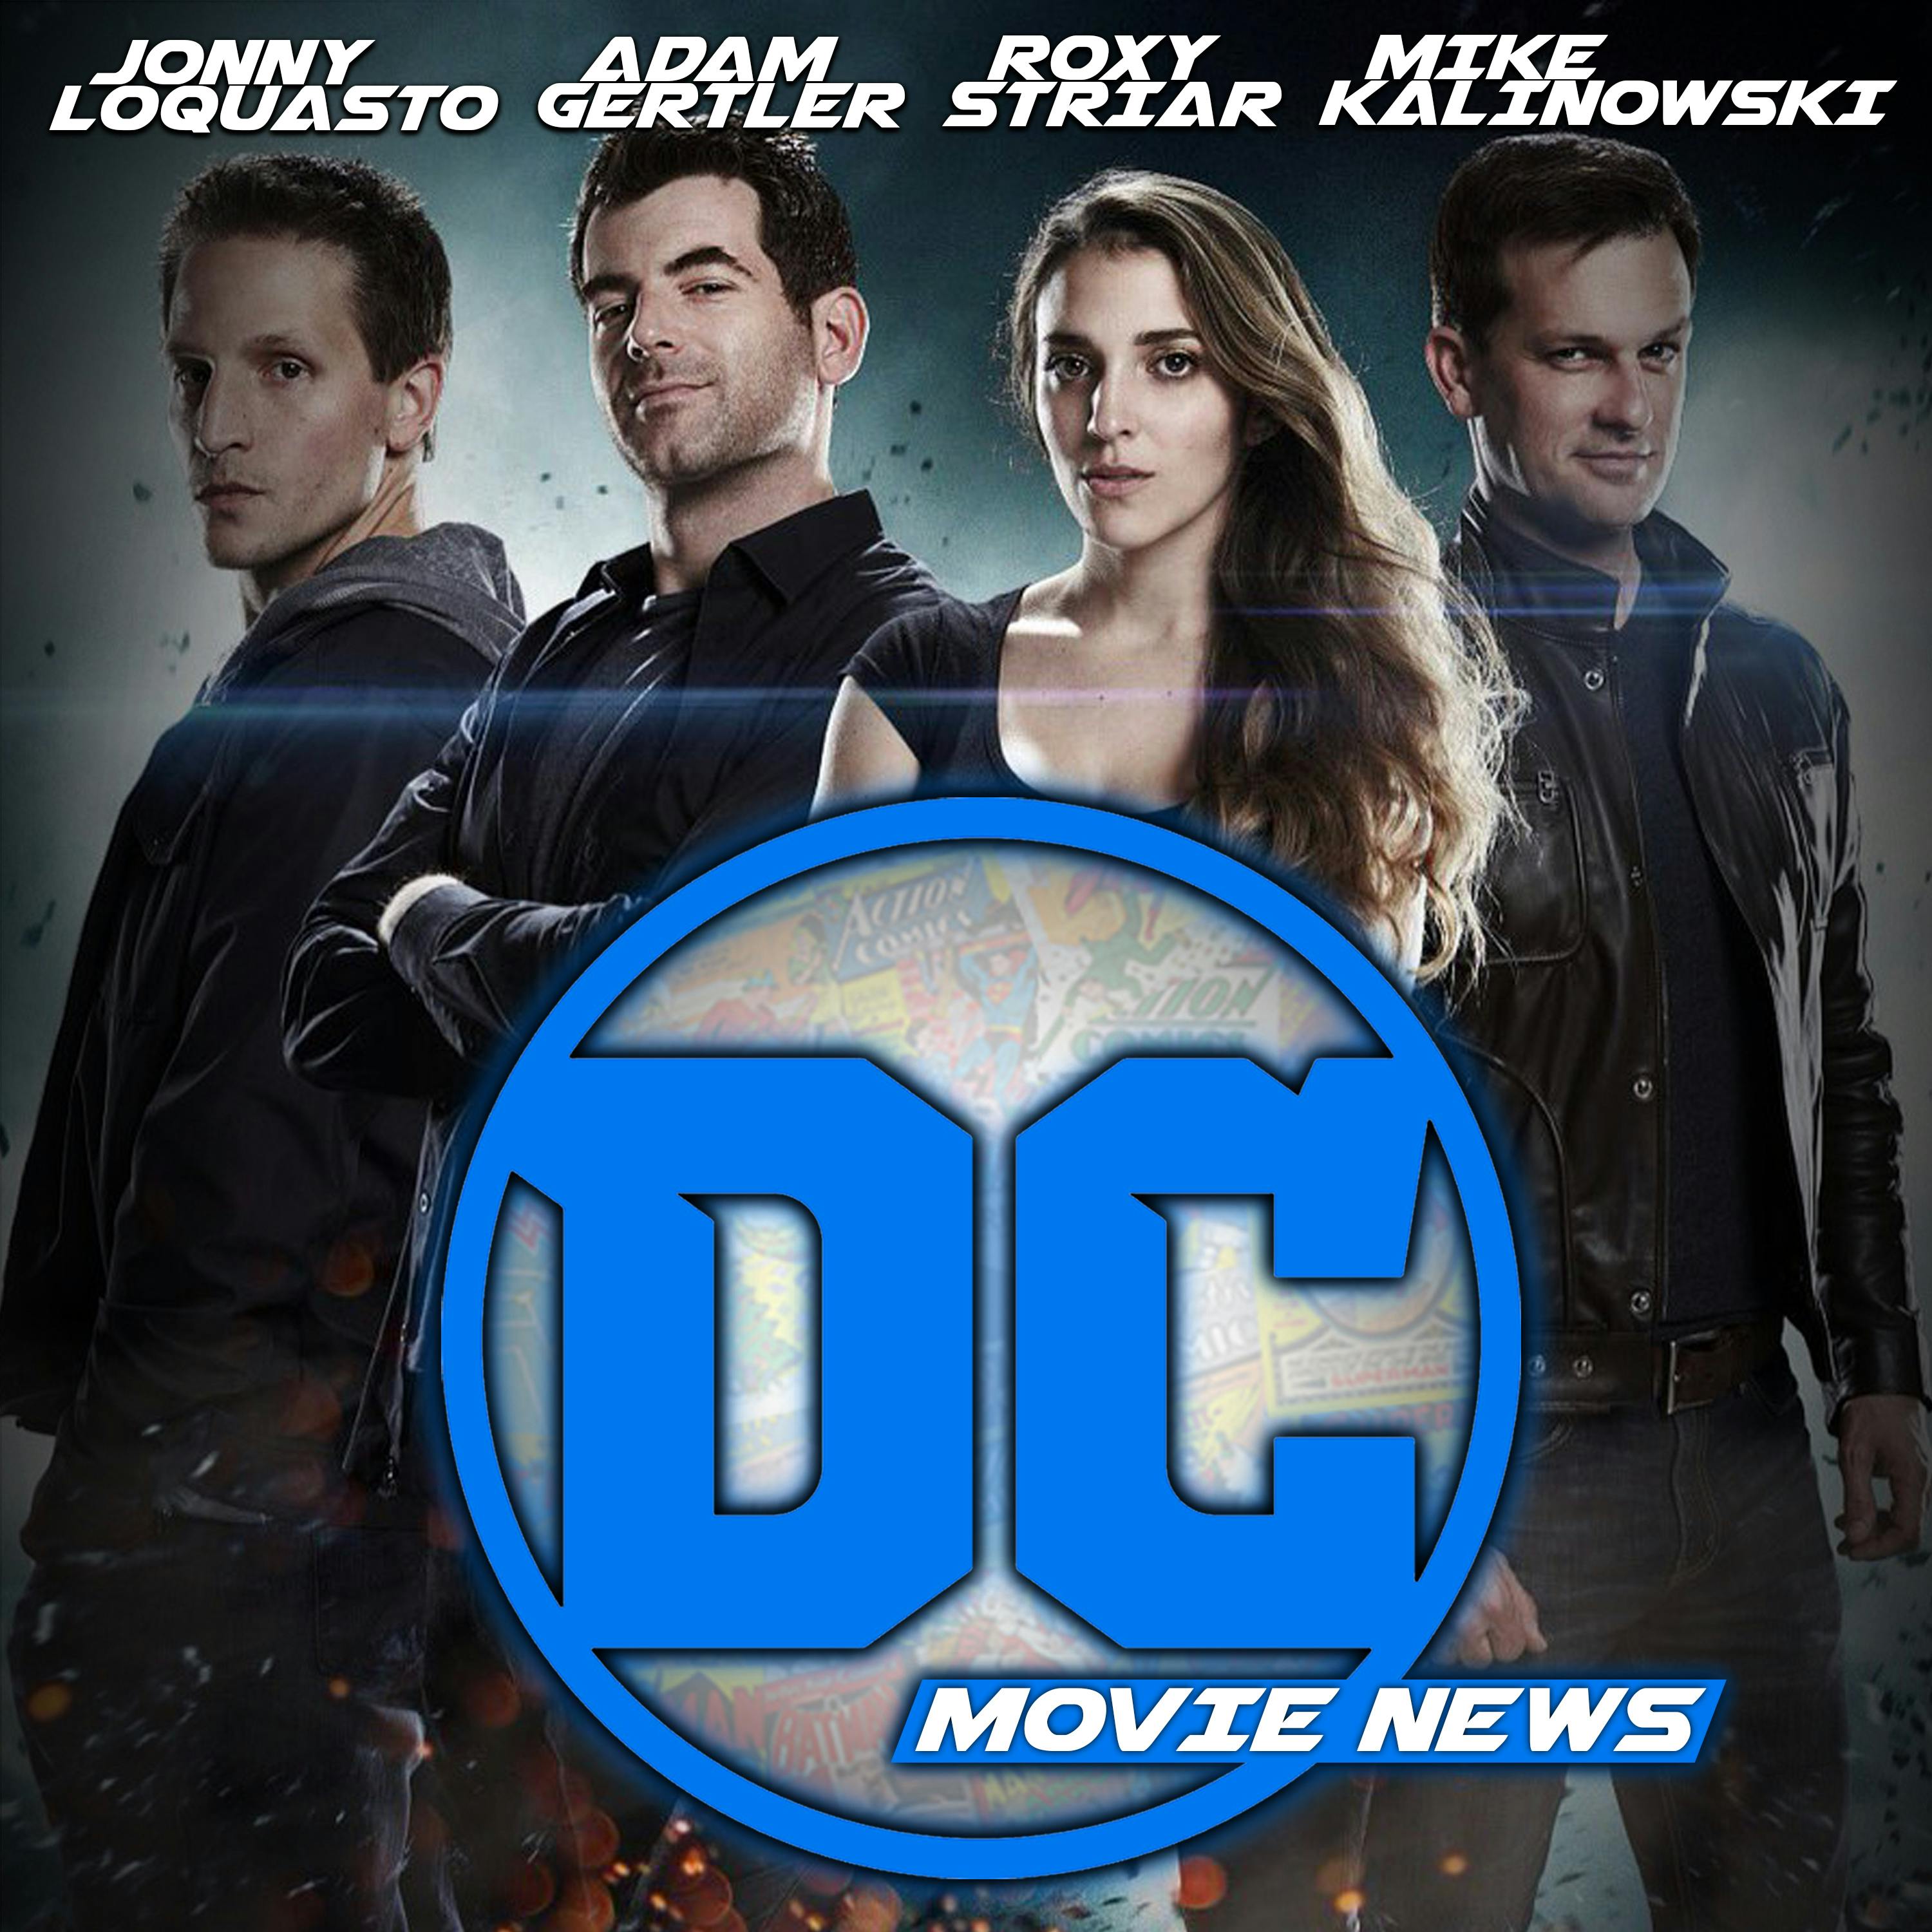 Early Wonder Woman Reactions, Lego Batman Dominating & More! – DC Movie News